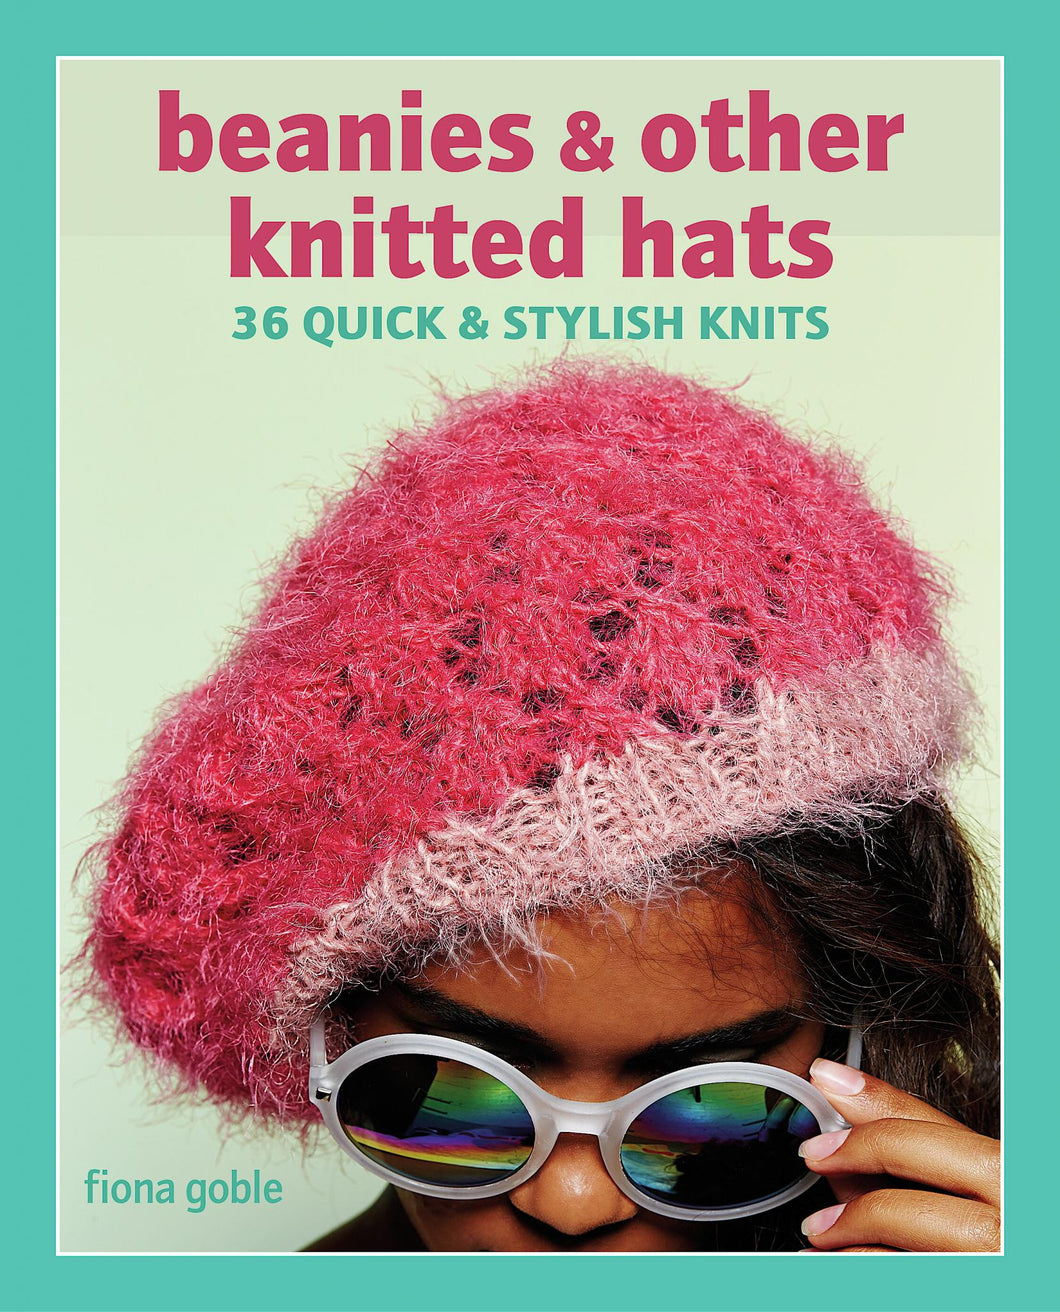 Beanies and Other Knitted Hats